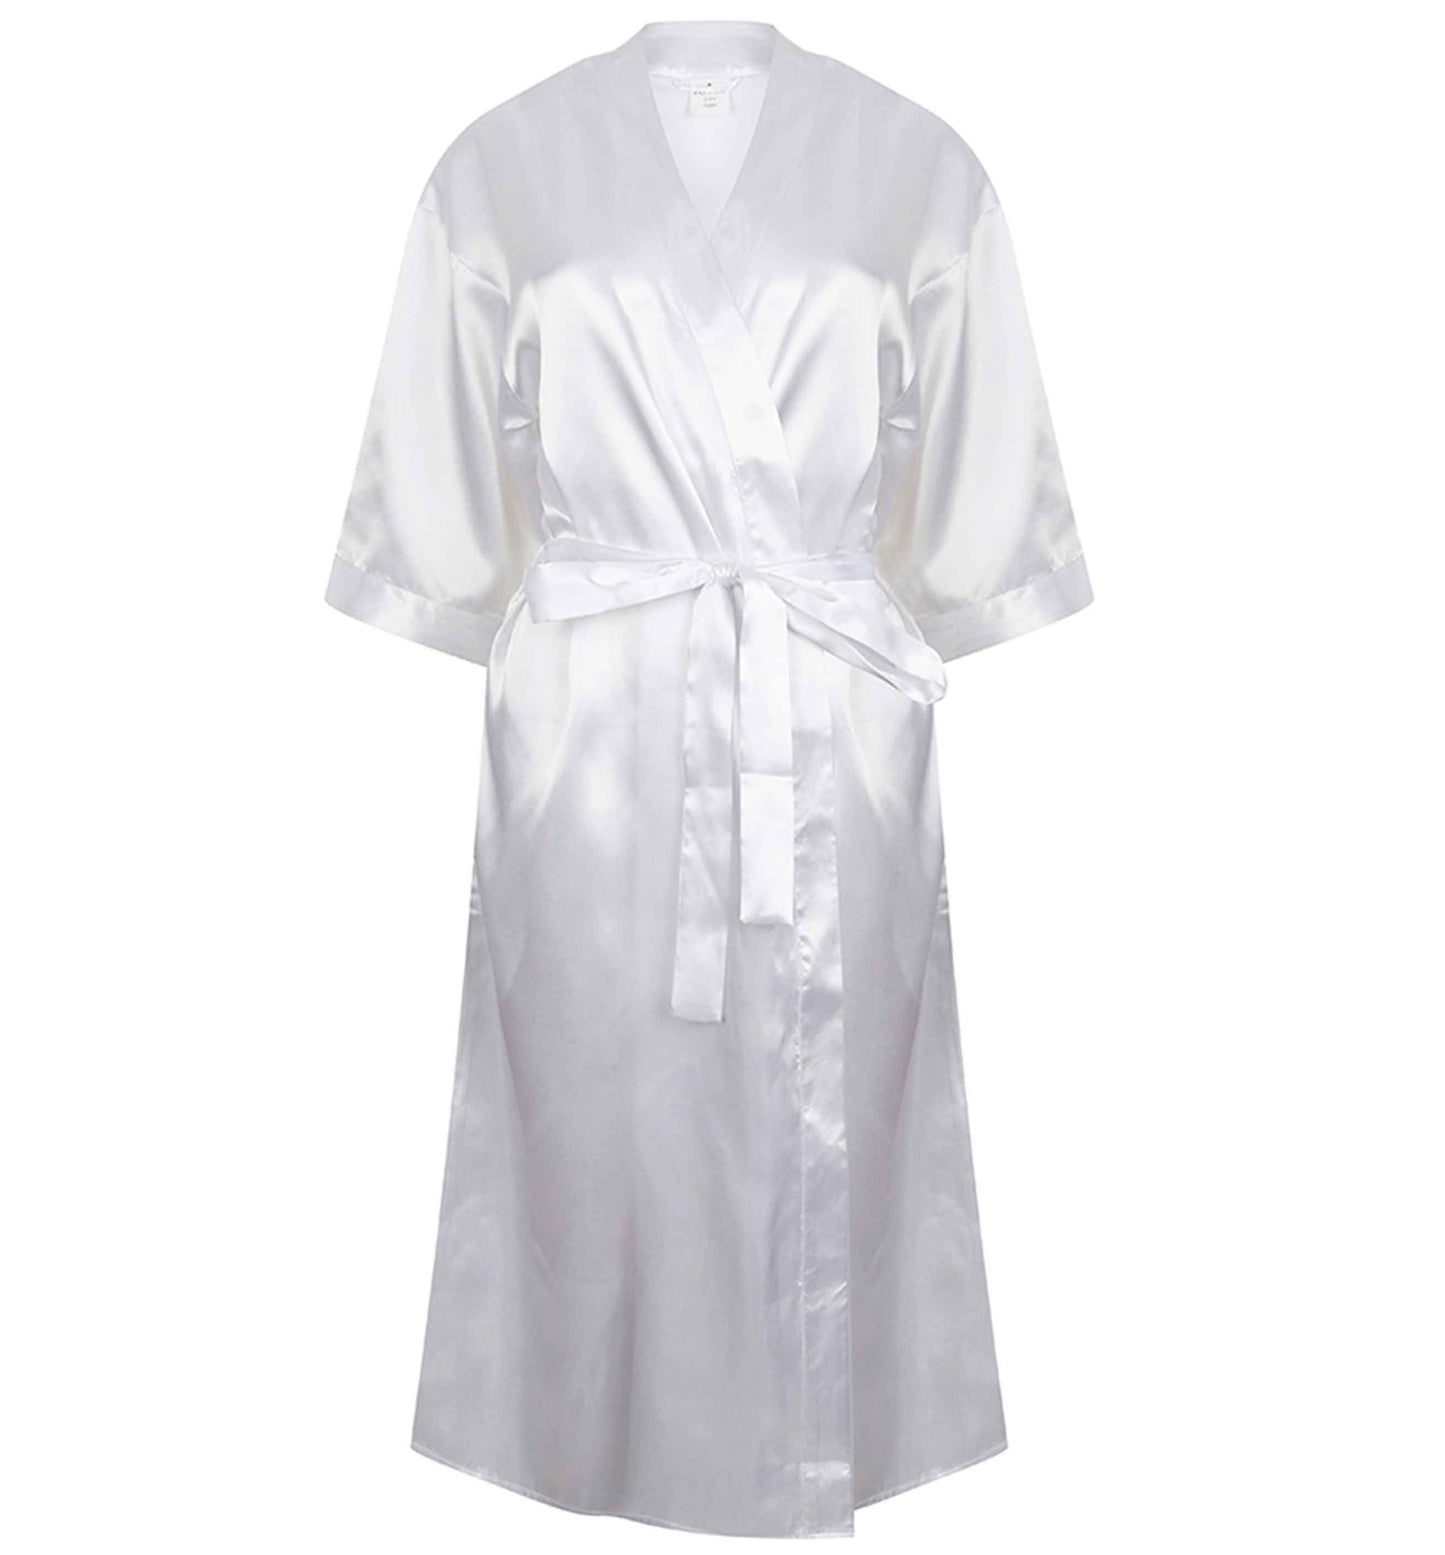 Having a drink or two before she says I do | 8-18 | Kimono style satin robe | Ladies dressing gown